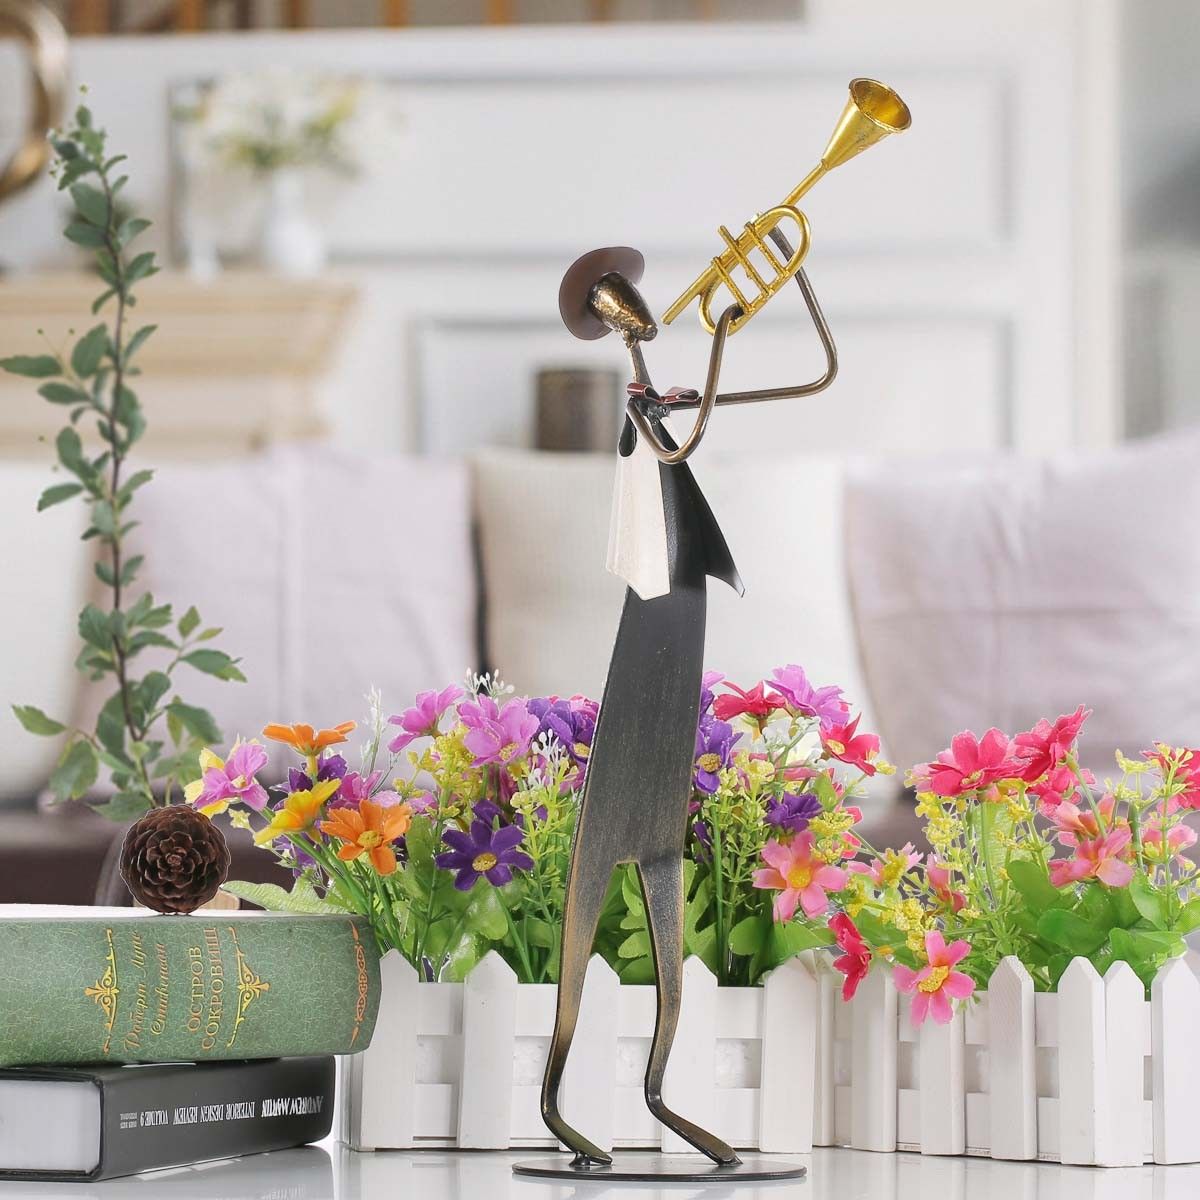 What a Valentines Day Gifts: Trumpet Music Room Decor Gifts